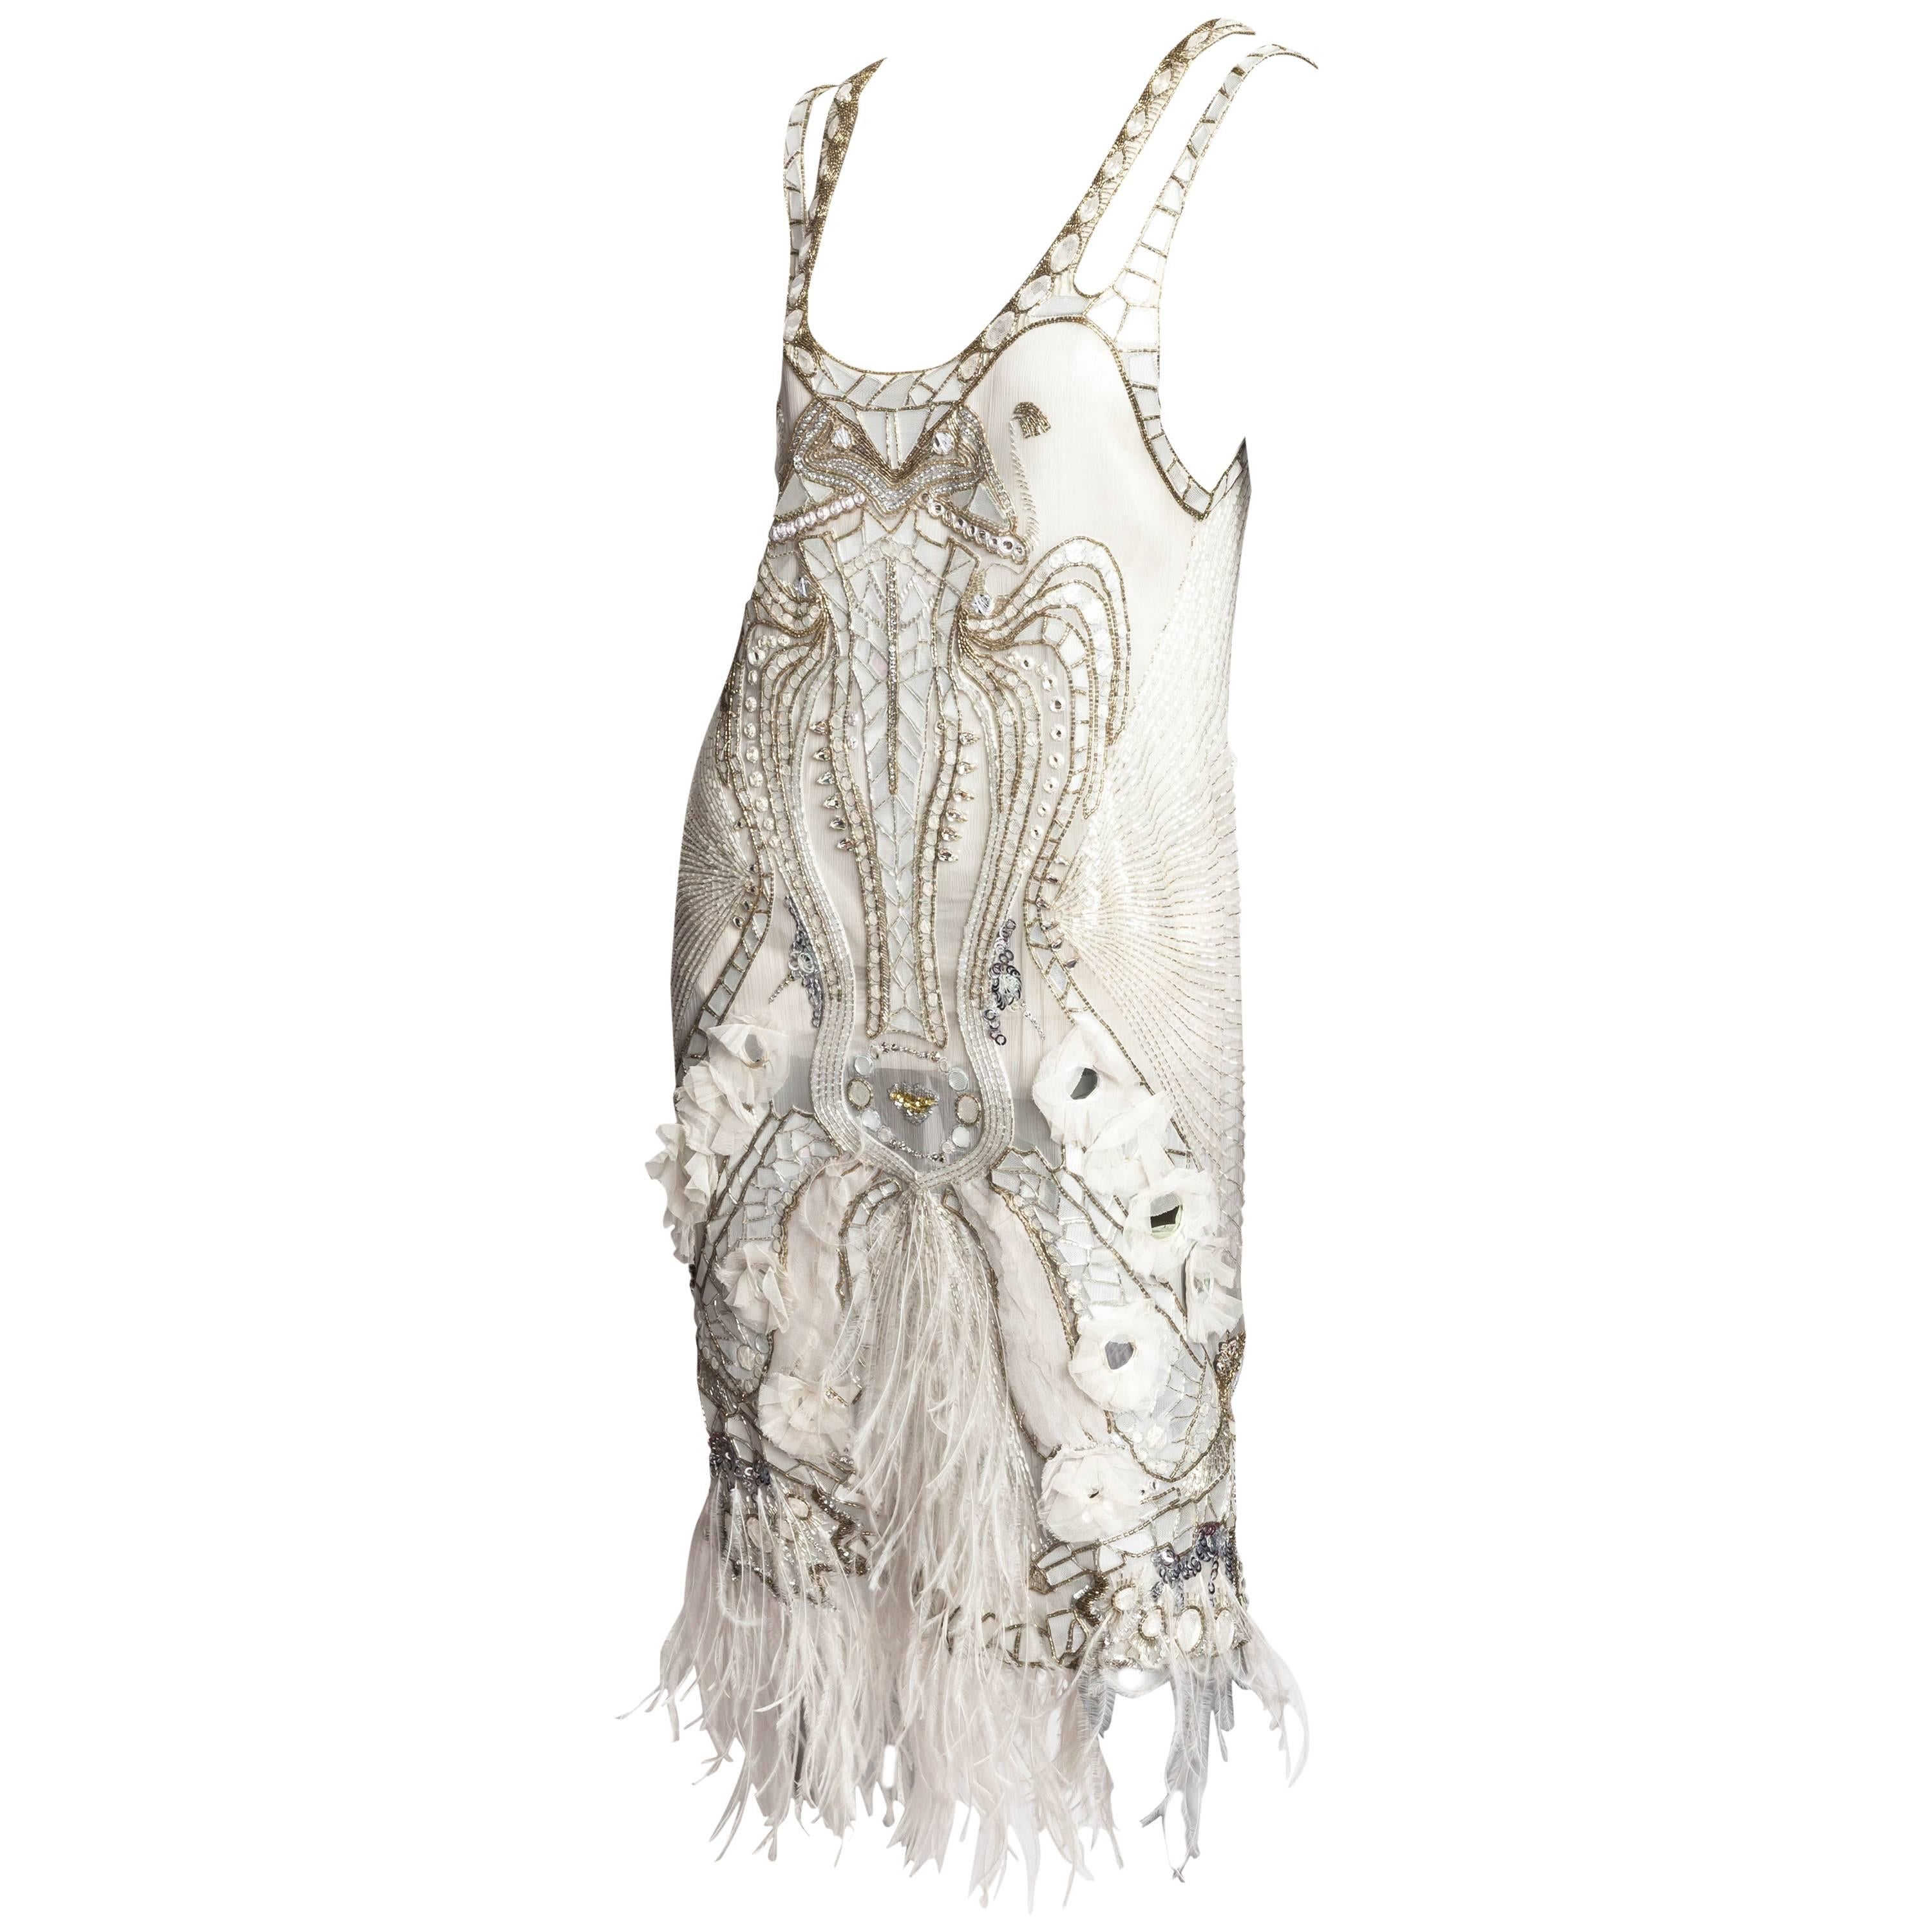 Emanuel Ungaro Beaded Cocktail Dress with Ostrich Feather Trim - 44